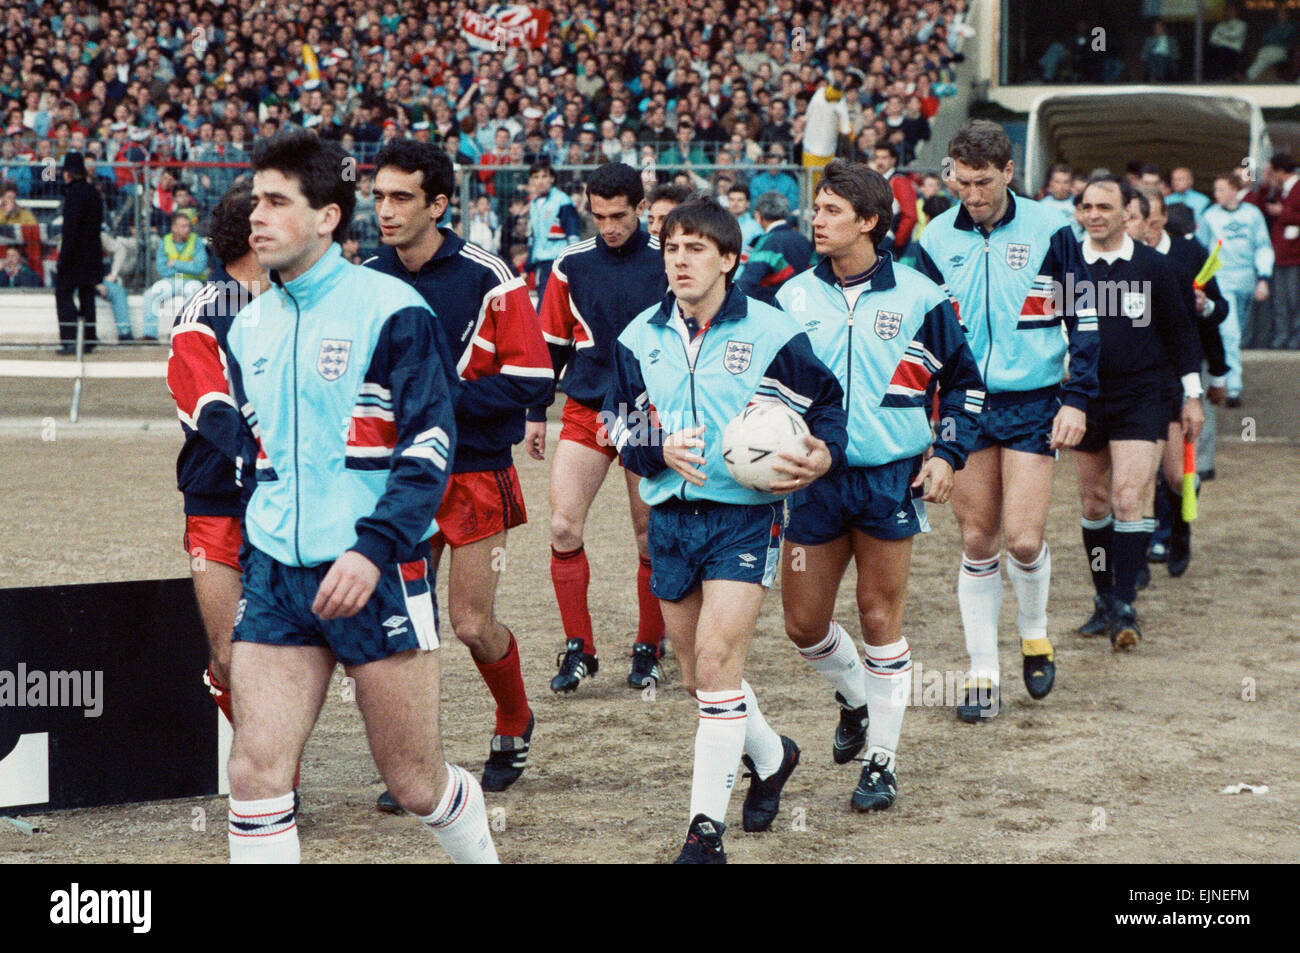 1990 World Cup Qualifier at Wembley Stadium. England 5 v Albania 0. The two teams walk out on to the pitch before the match. England players left to right are: Neil Webb, Peter Beardsley, Gary Lineker and Terry Butcher. 26th April 1989. Stock Photo